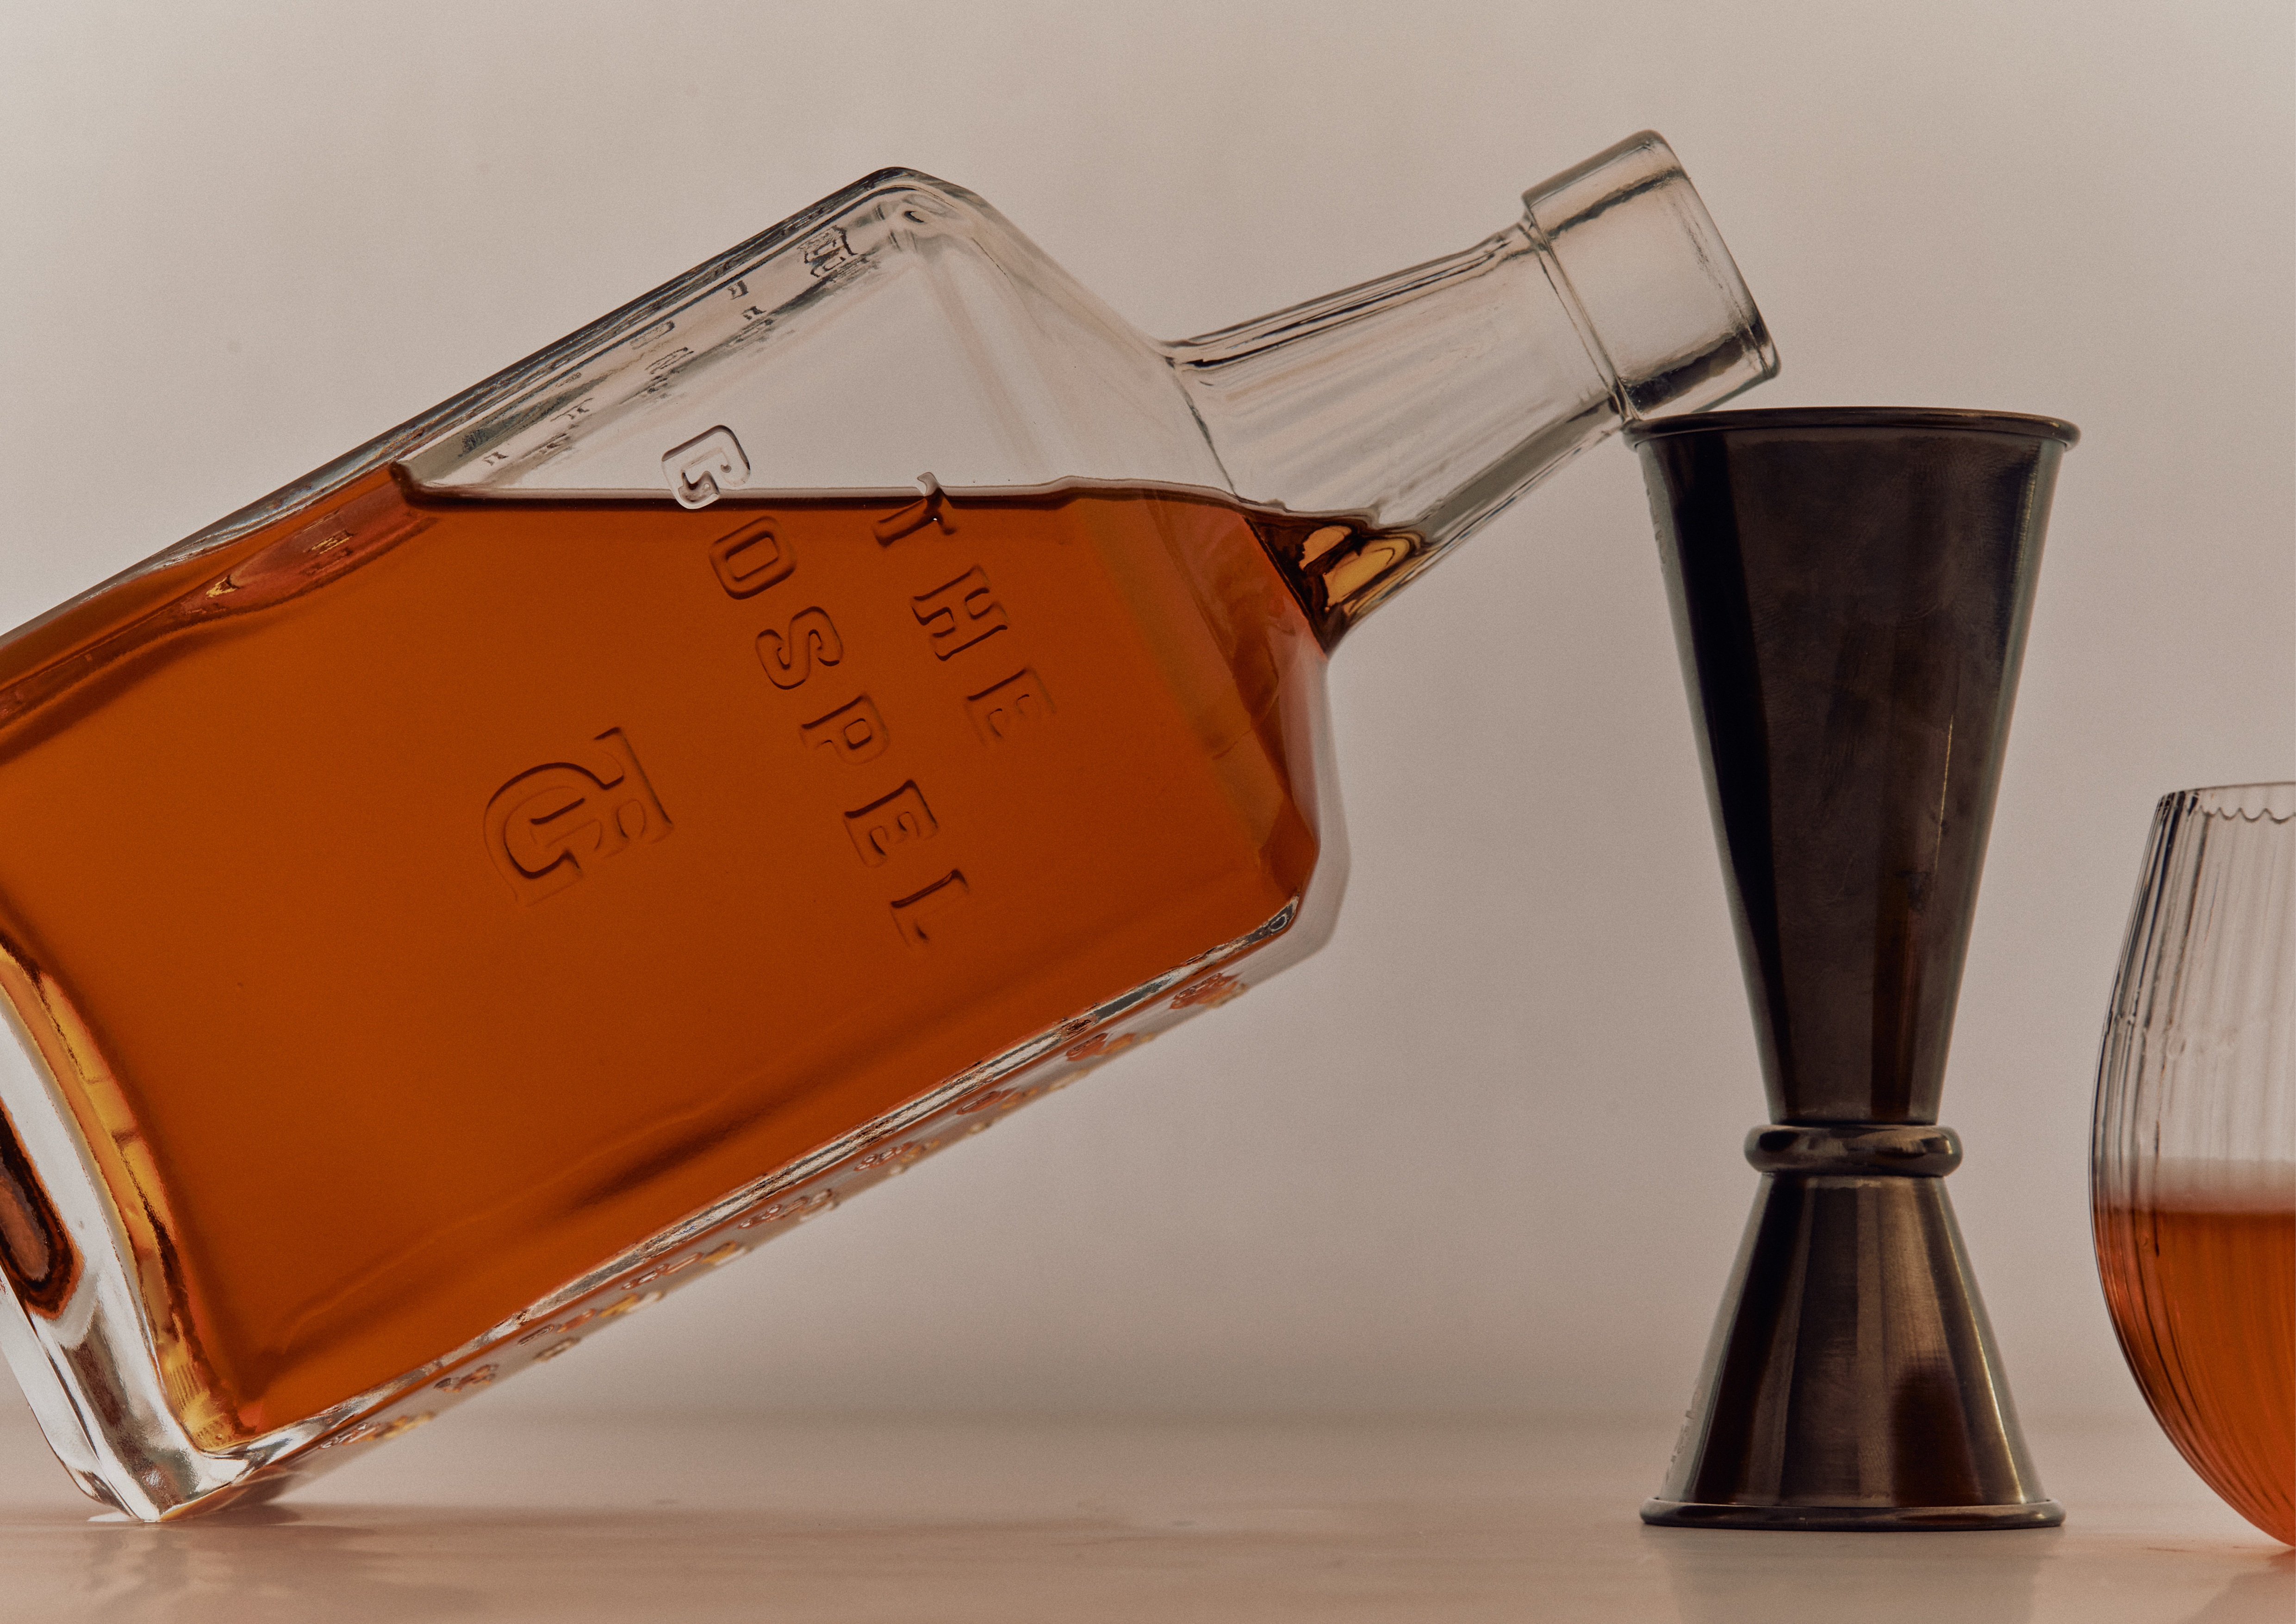 DDMMYY’s award-winning brand identity, packaging and custom typeface for Melbourne whiskey company The Gospel